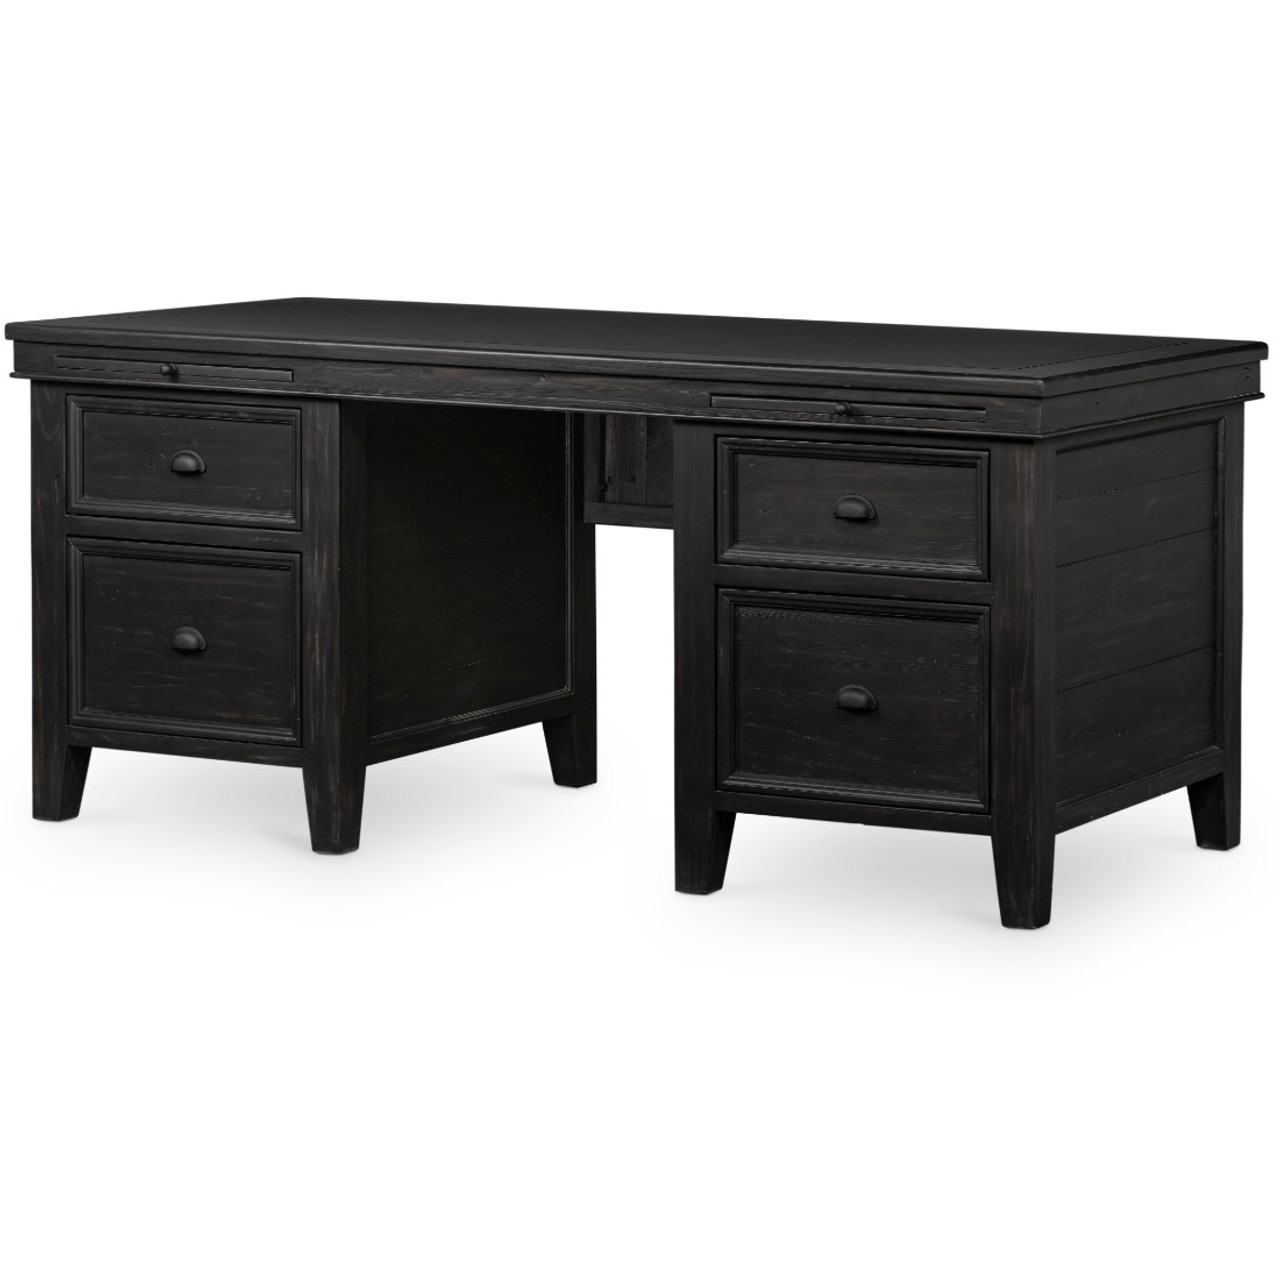 Lawyer S Ink Black Reclaimed Wood 4 Drawers Executive Desk 71